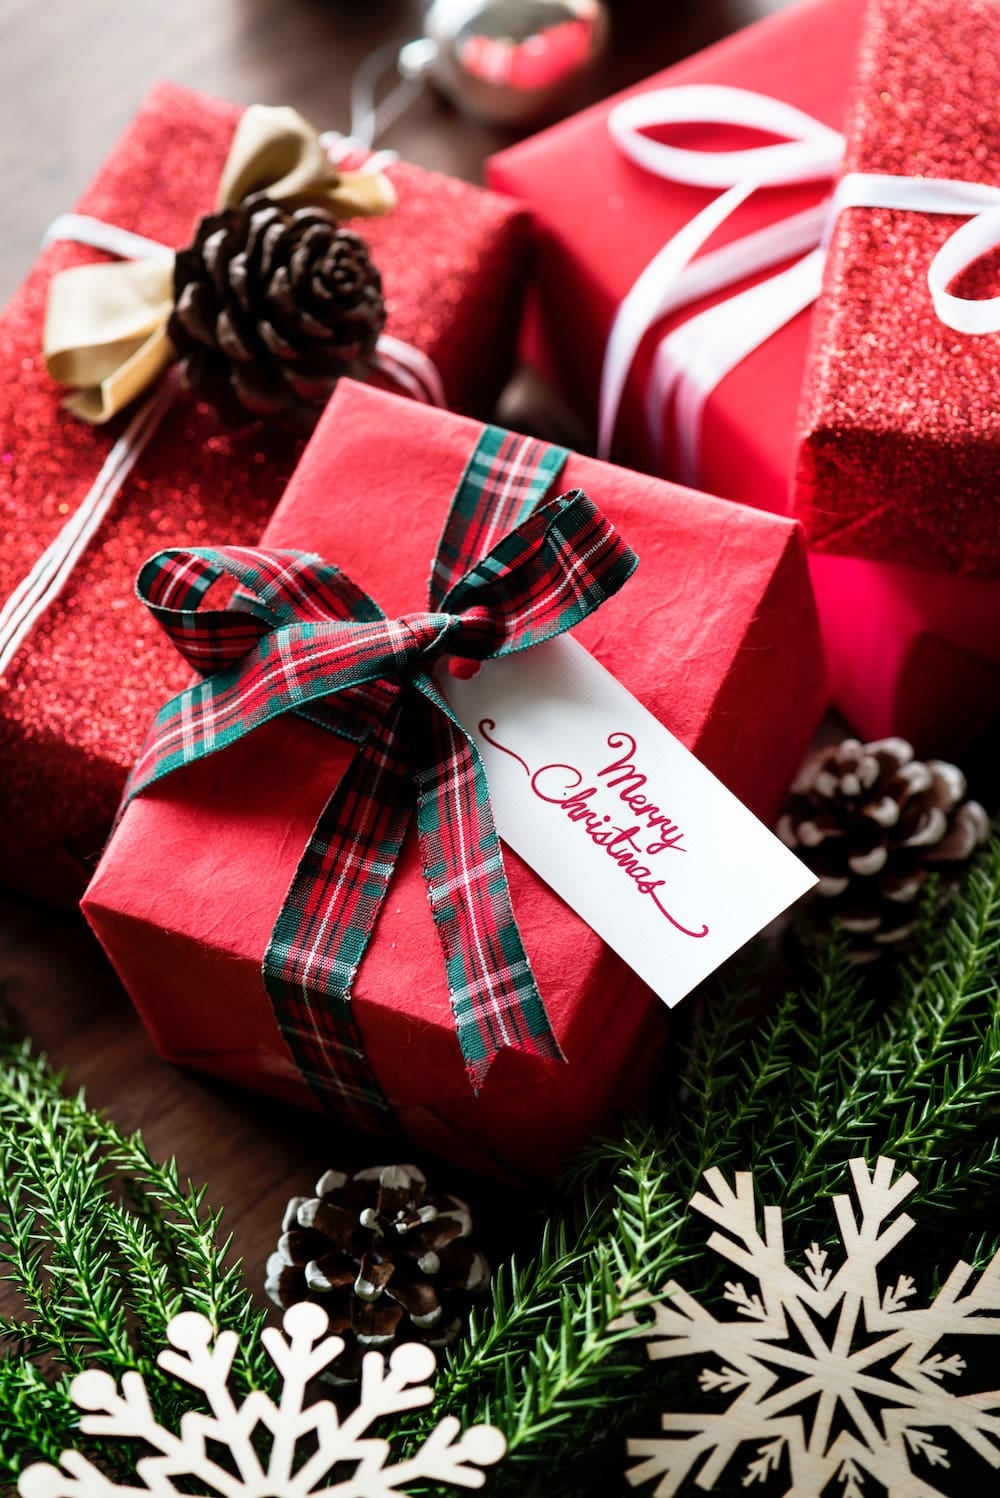 The Psychology of Christmas Gifts